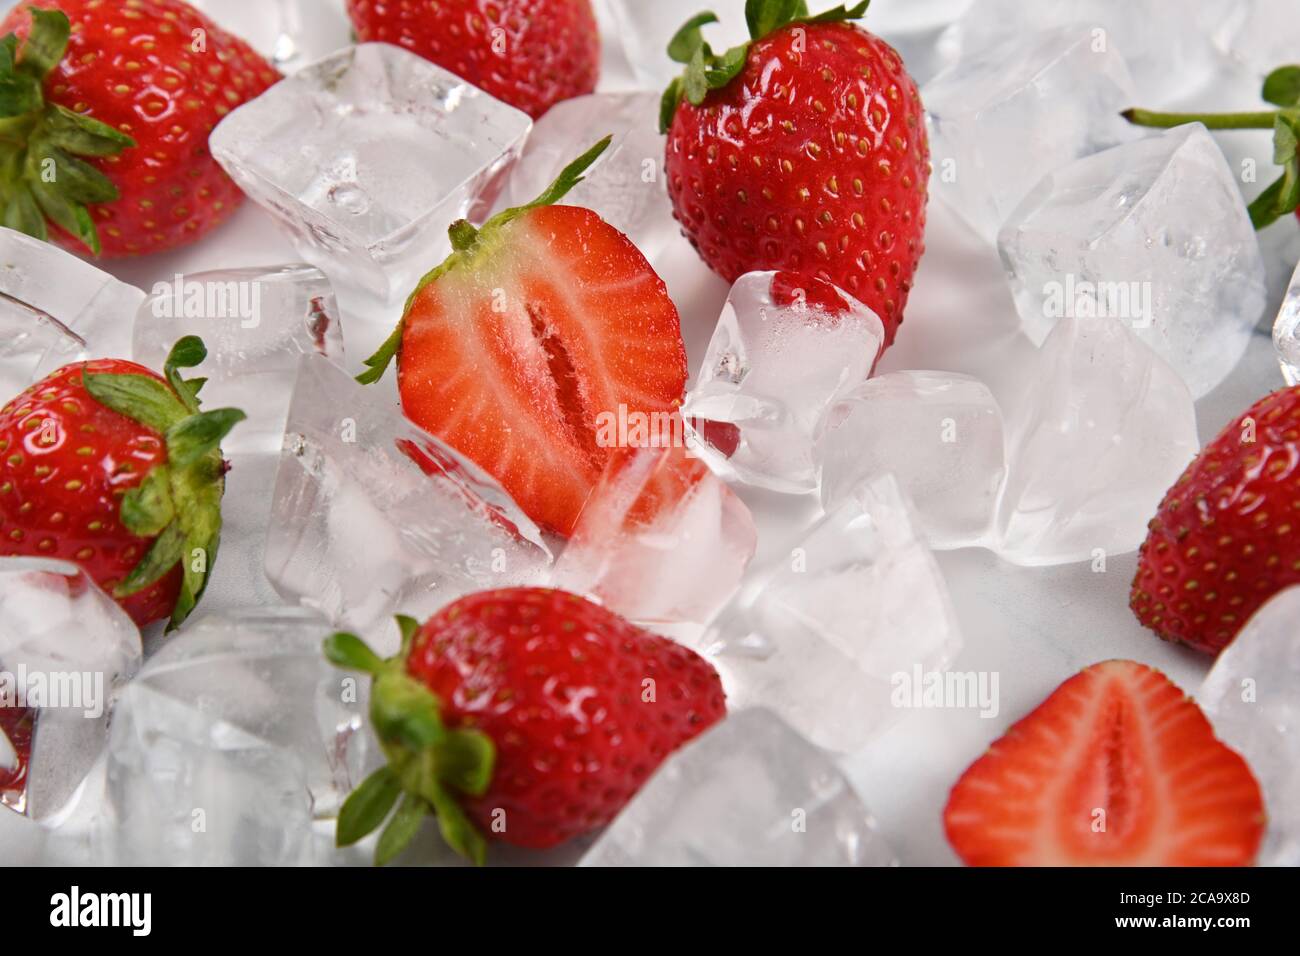 Close up fresh red ripe strawberries and ice cubes on table, high angle view Stock Photo